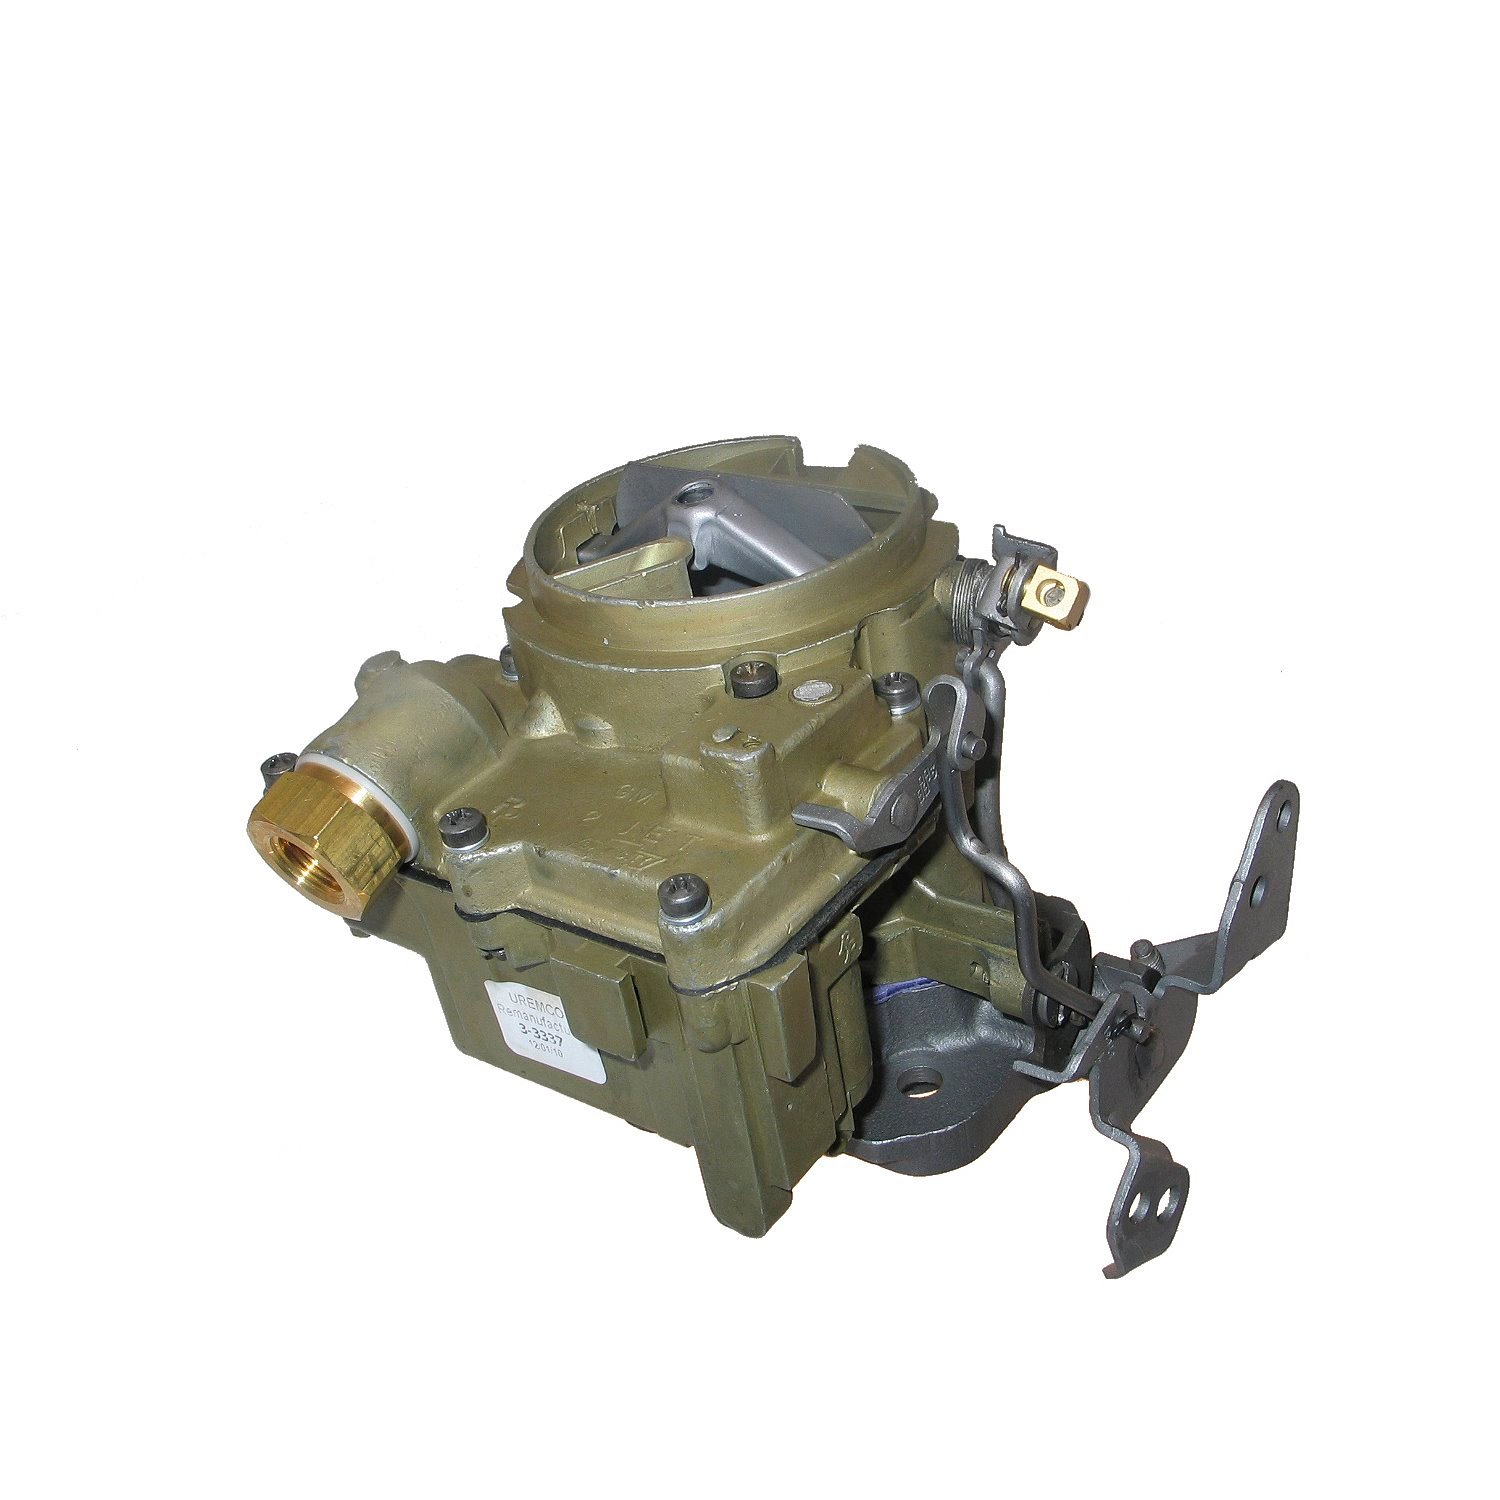 3-3337 Rochester Remanufactured Carburetor, 2GV-Style